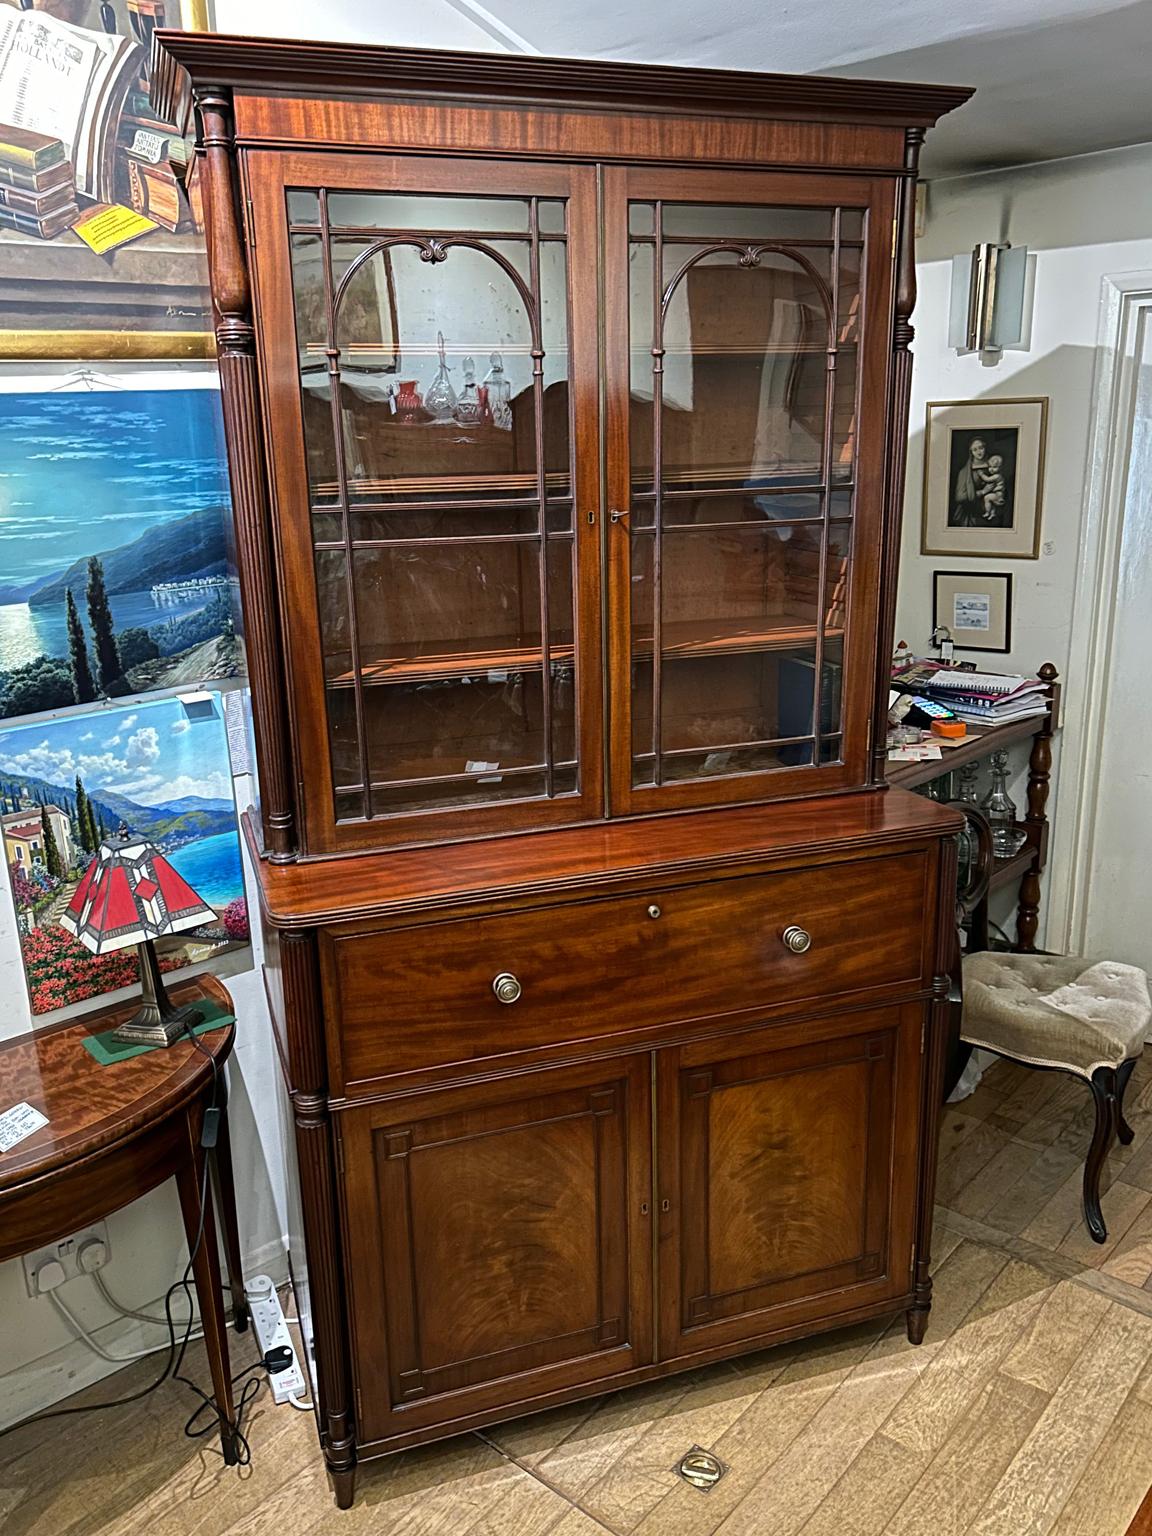 A very high quality 19th Century Regency Mahogany Secrétaire Bookcase. The upper section with moulded cornice above two astragal glazed doors flanked by reeded columns, fitted with three adjustable shelves. the lower section is fitted with a pull